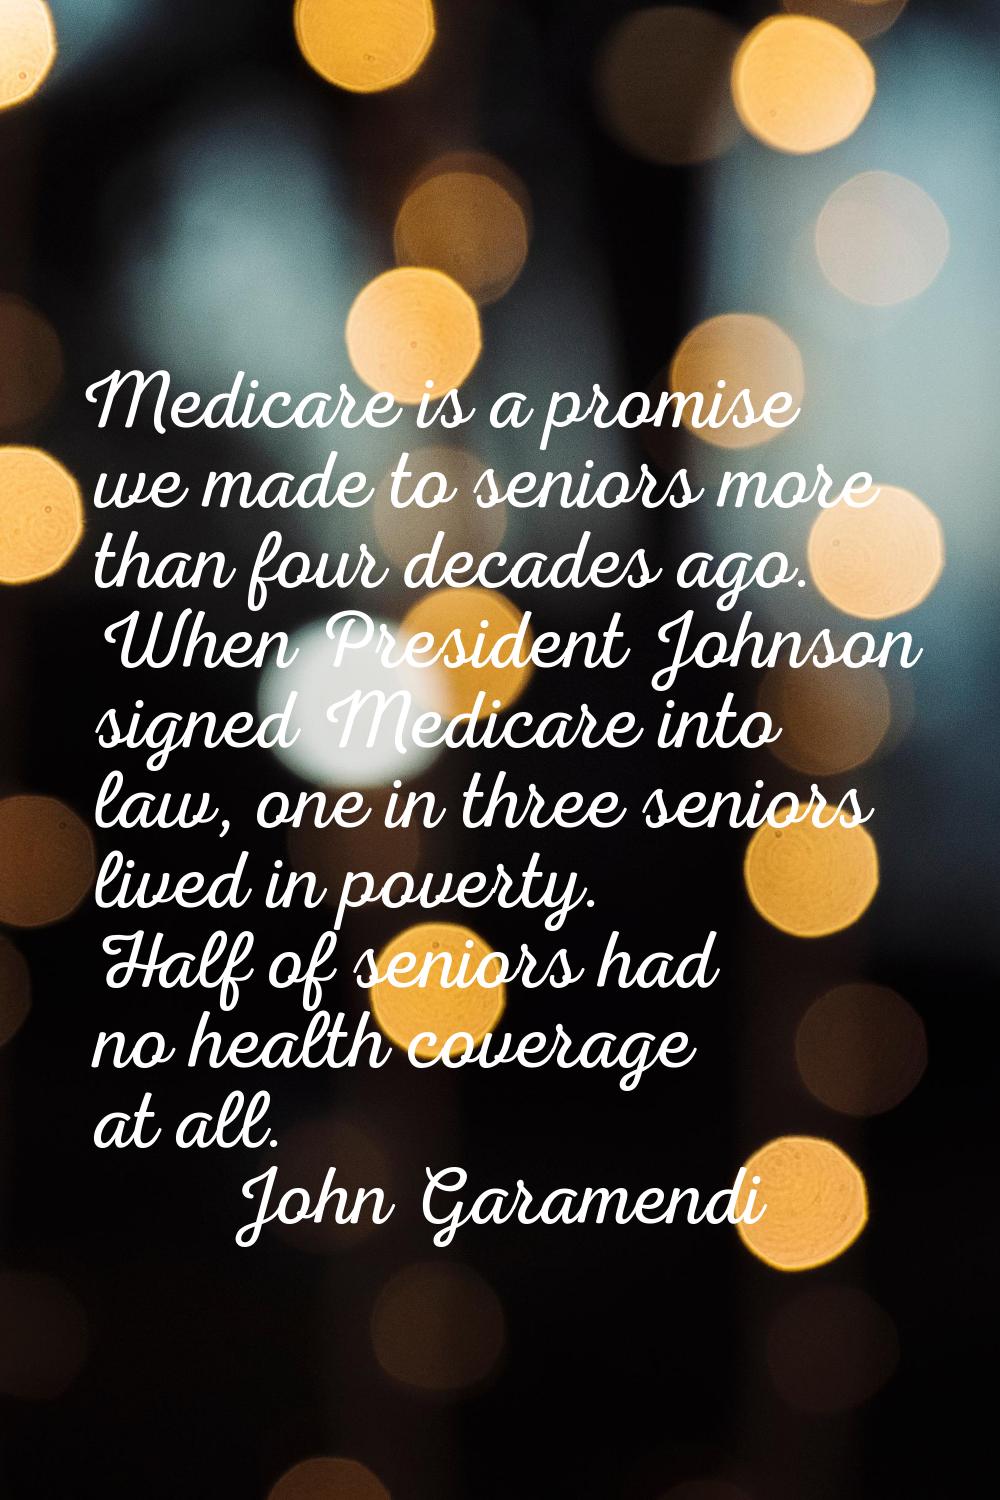 Medicare is a promise we made to seniors more than four decades ago. When President Johnson signed 